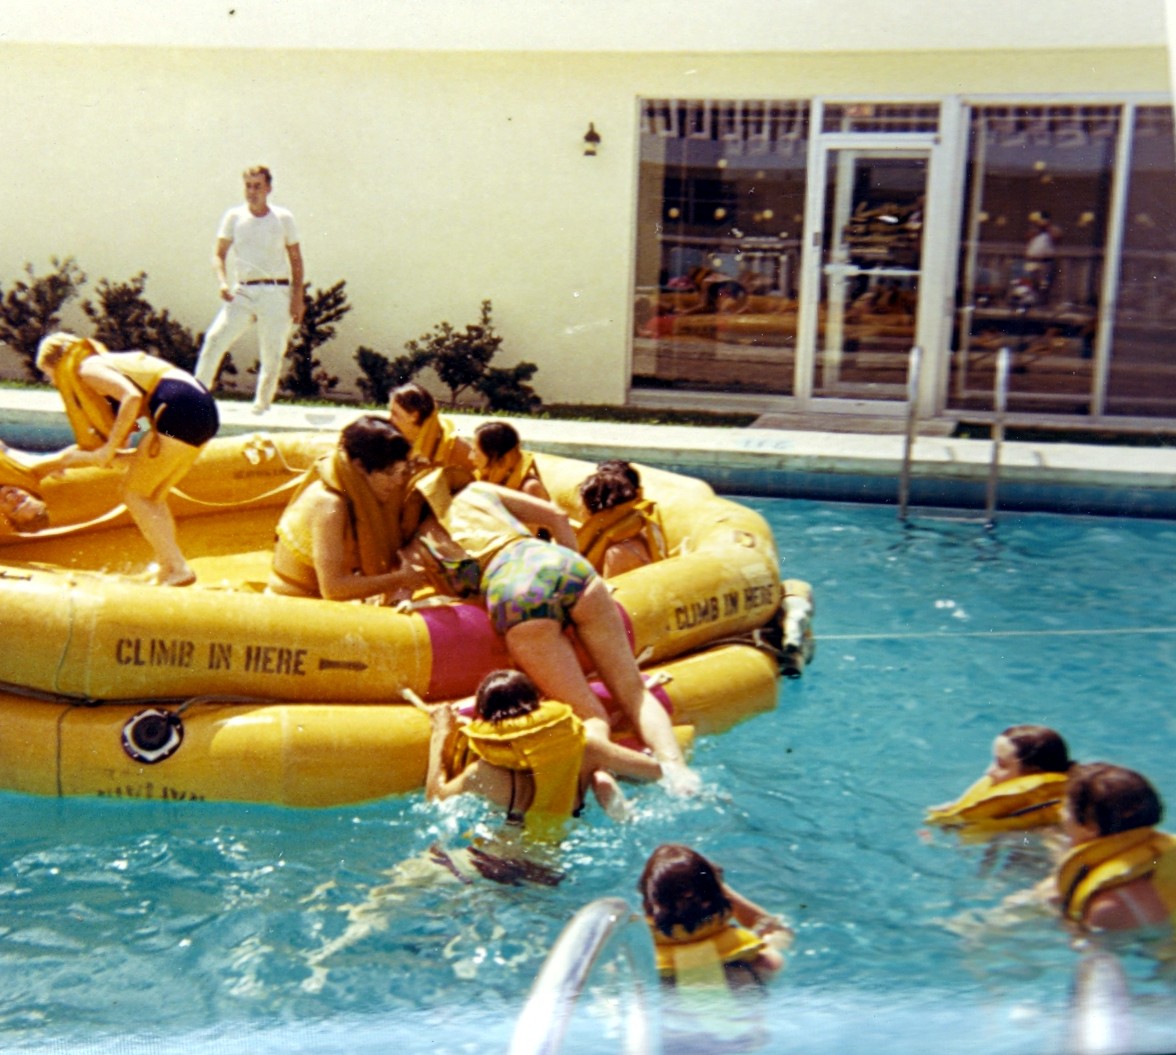 1968 April, Flight Service Class 13 practices water ditching survival.